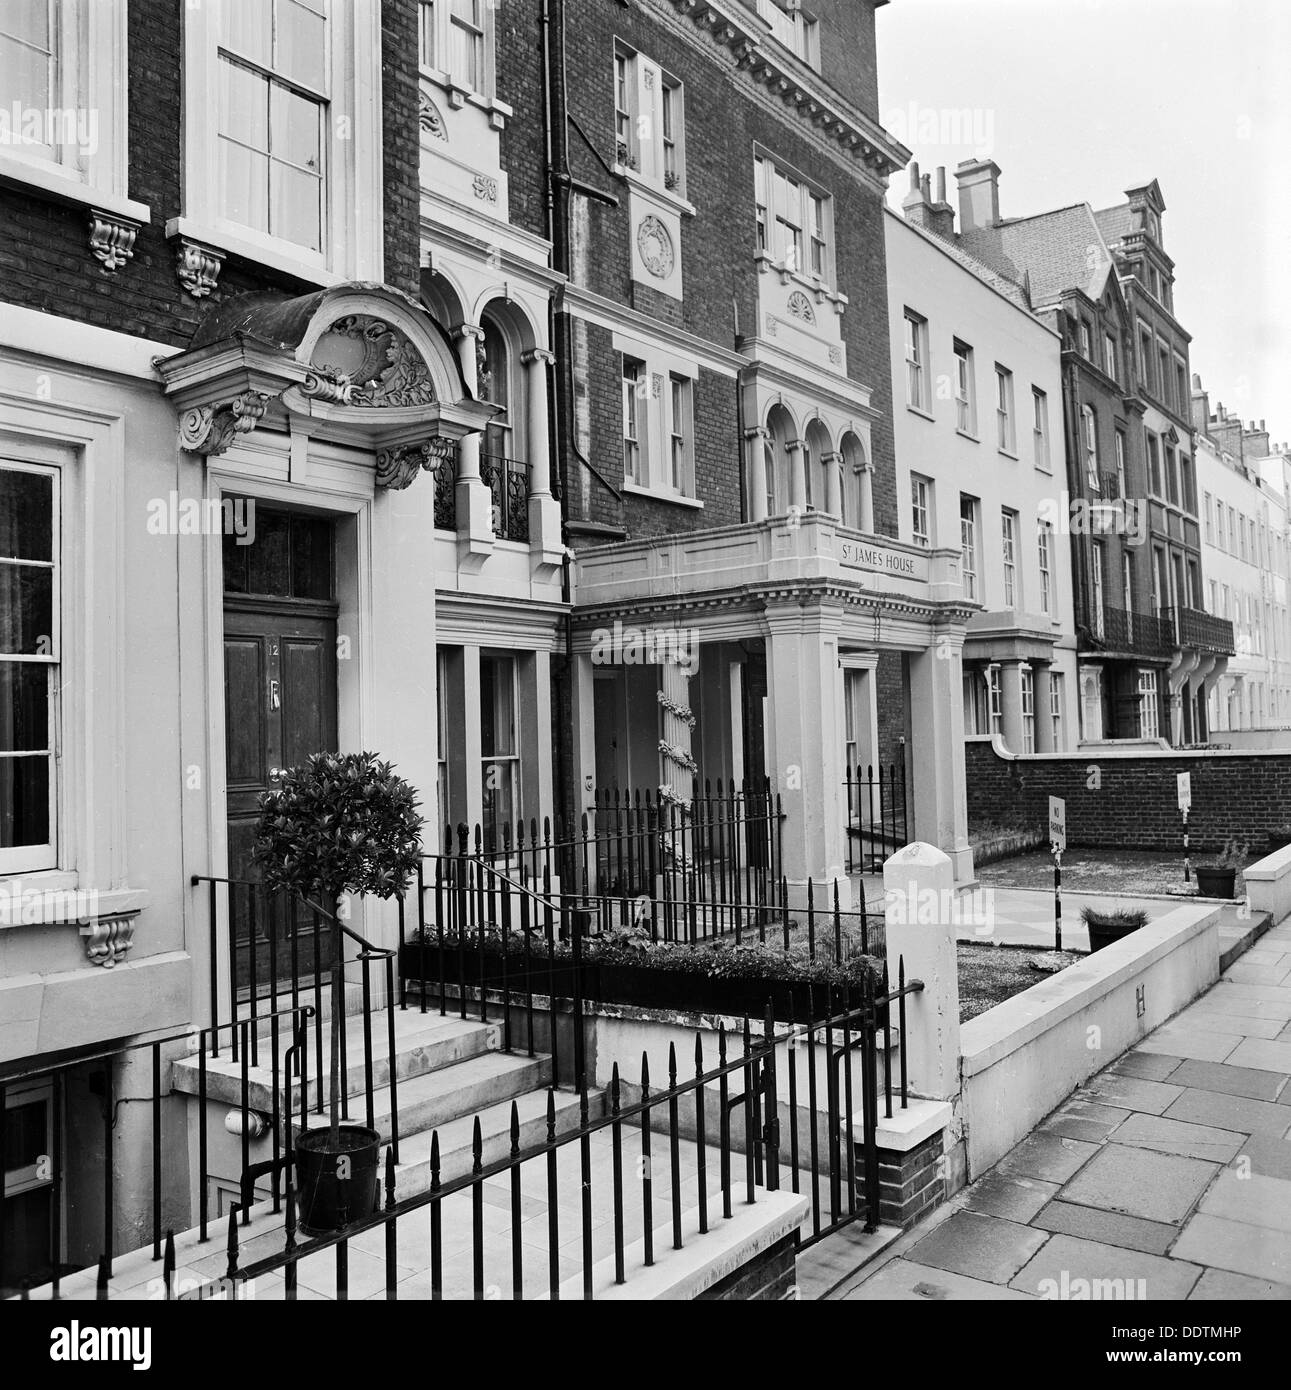 Chelsea 1970s High Resolution Stock Photography and Images - Alamy